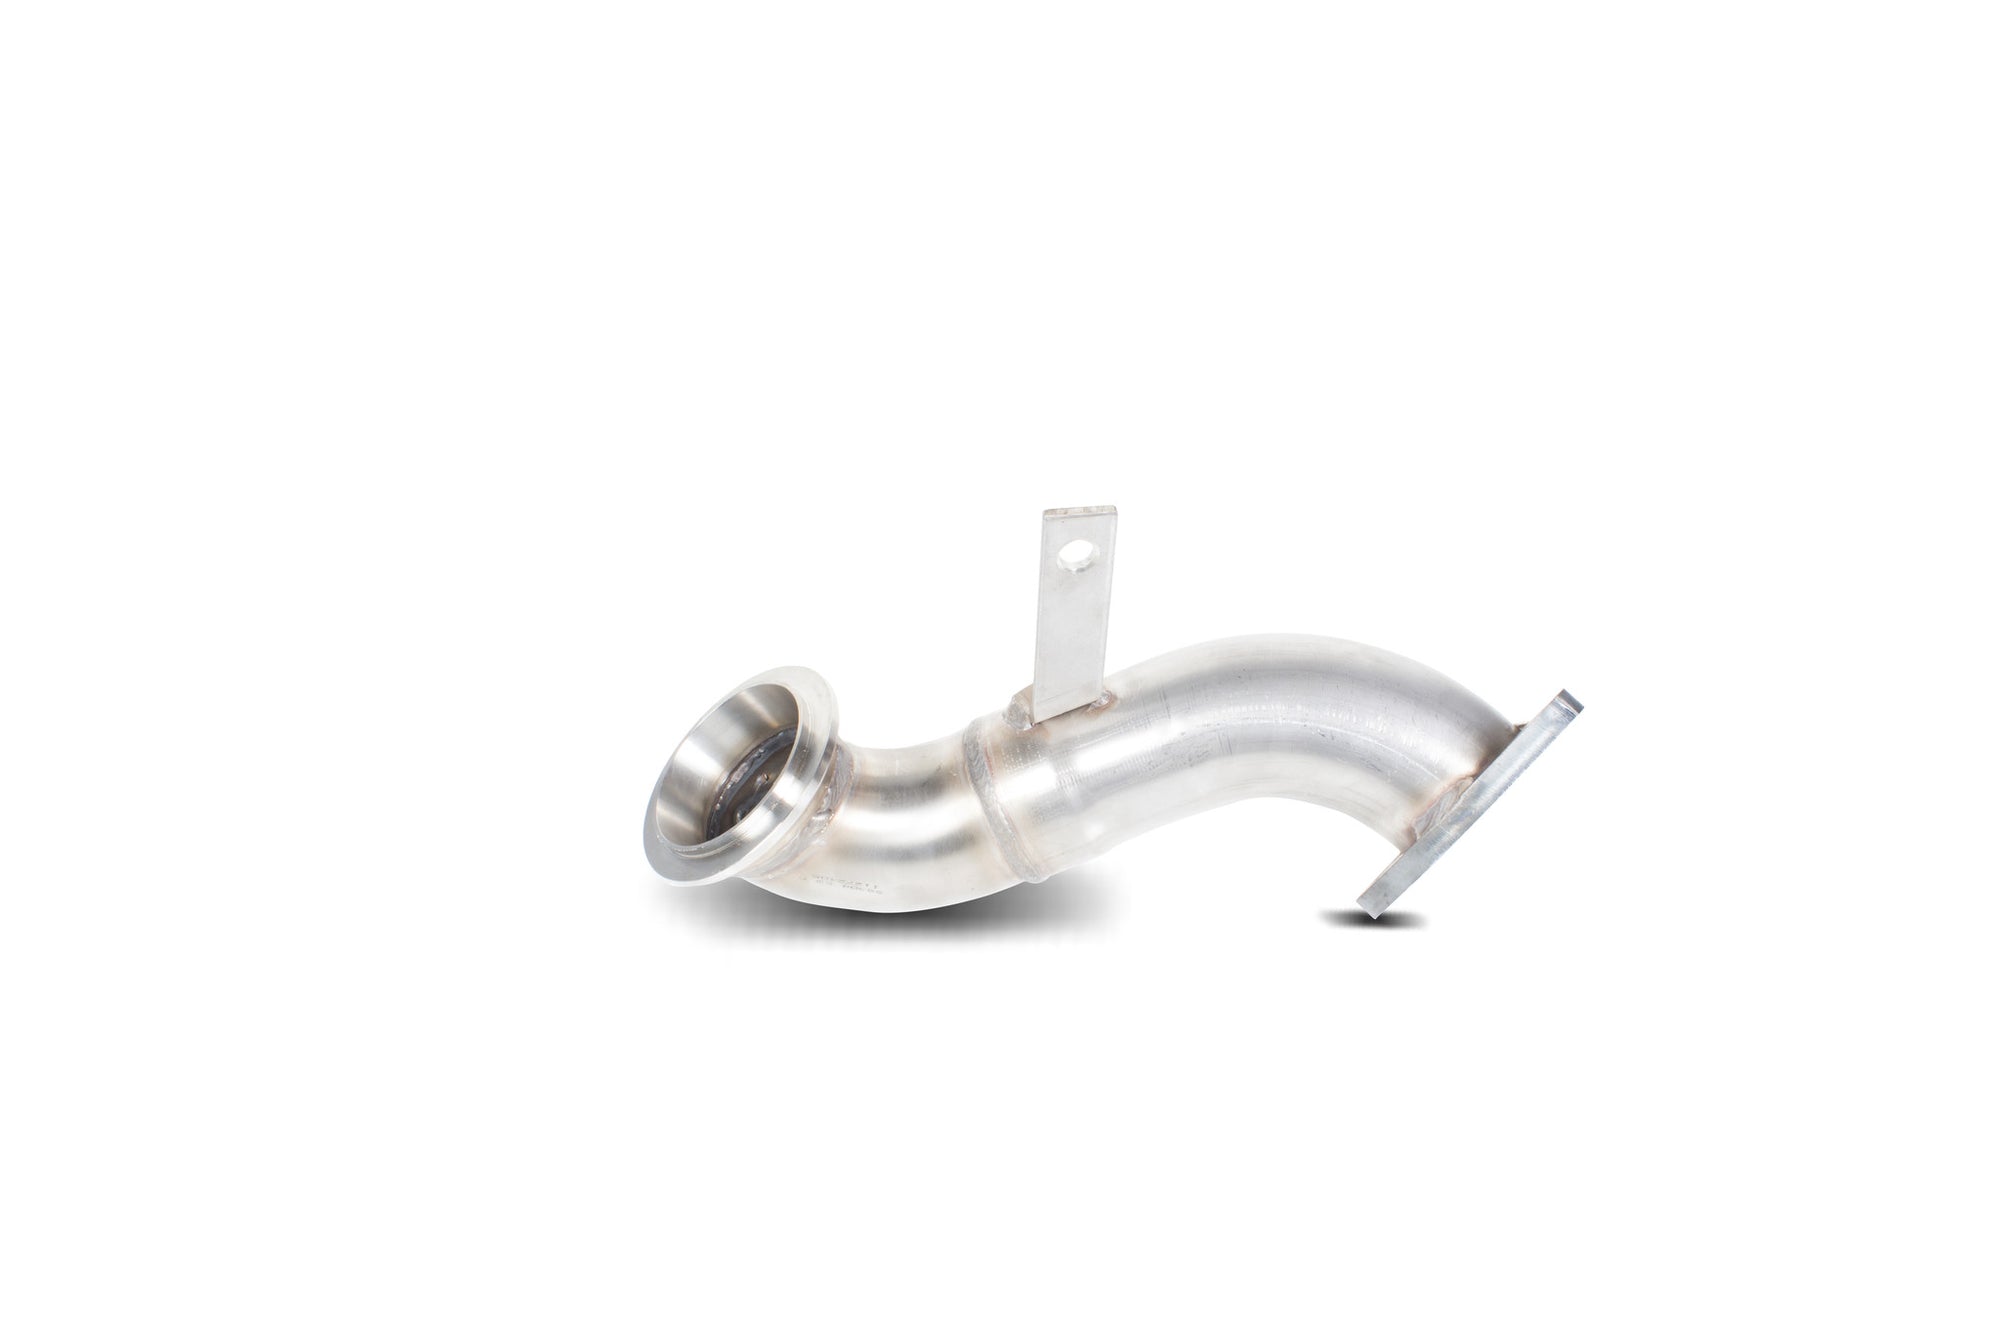 Vauxhall Astra GTC 1.4 Turbo  Downpipe with no catalyst